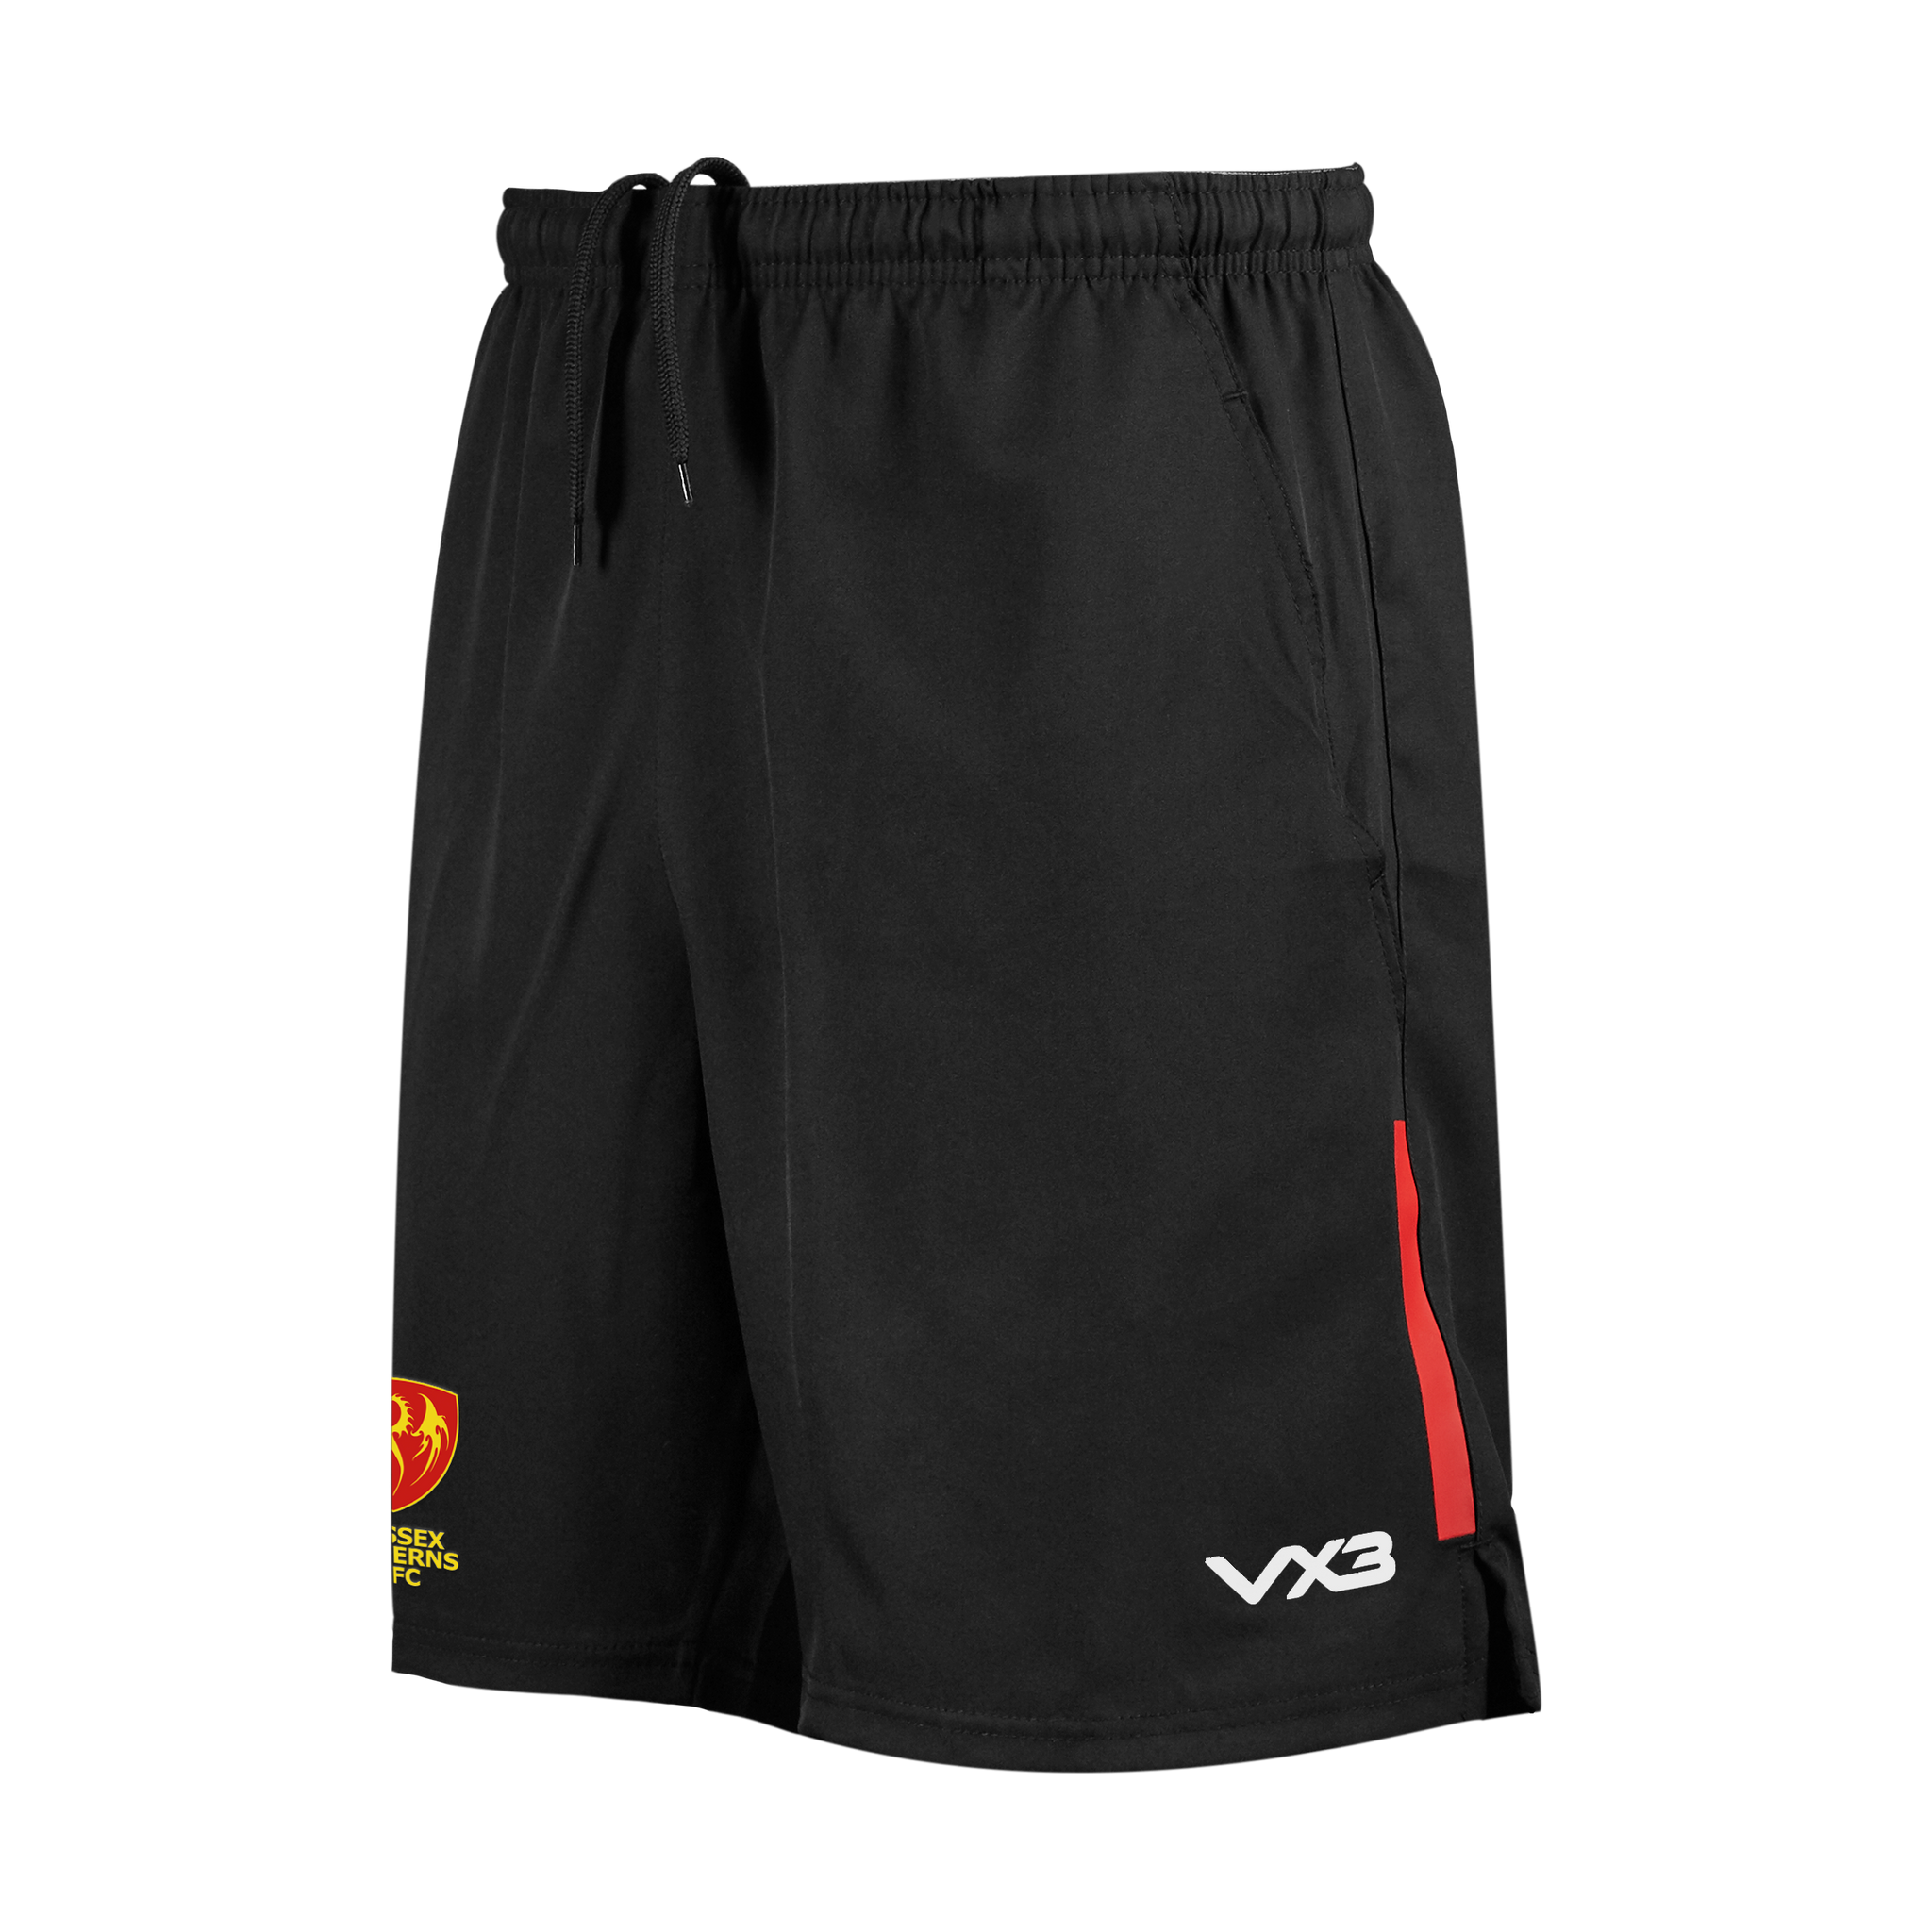 Wessex Wyverns RFC Fortis Travel Youth Shorts Black/Red